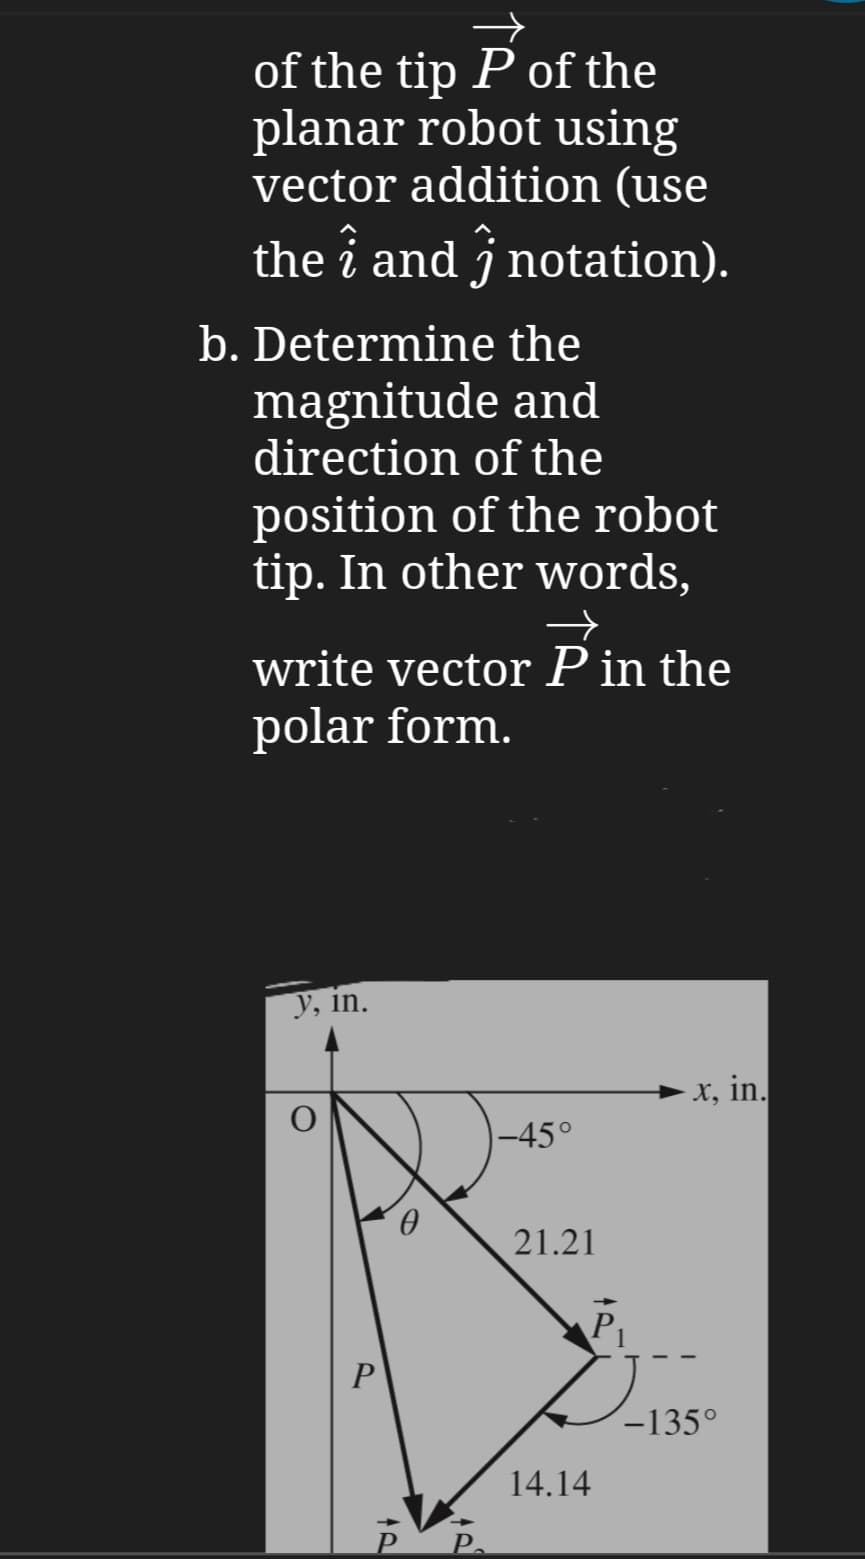 of the tip P of the
planar robot using
vector addition (use
the ↑ and ĵ notation).
b. Determine the
magnitude and
direction of the
position of the robot
tip. In other words,
→
write vector P in the
polar form.
y, in.
C
P
܂
-45°
· x, in.
21.21
14.14
P₁
-135°